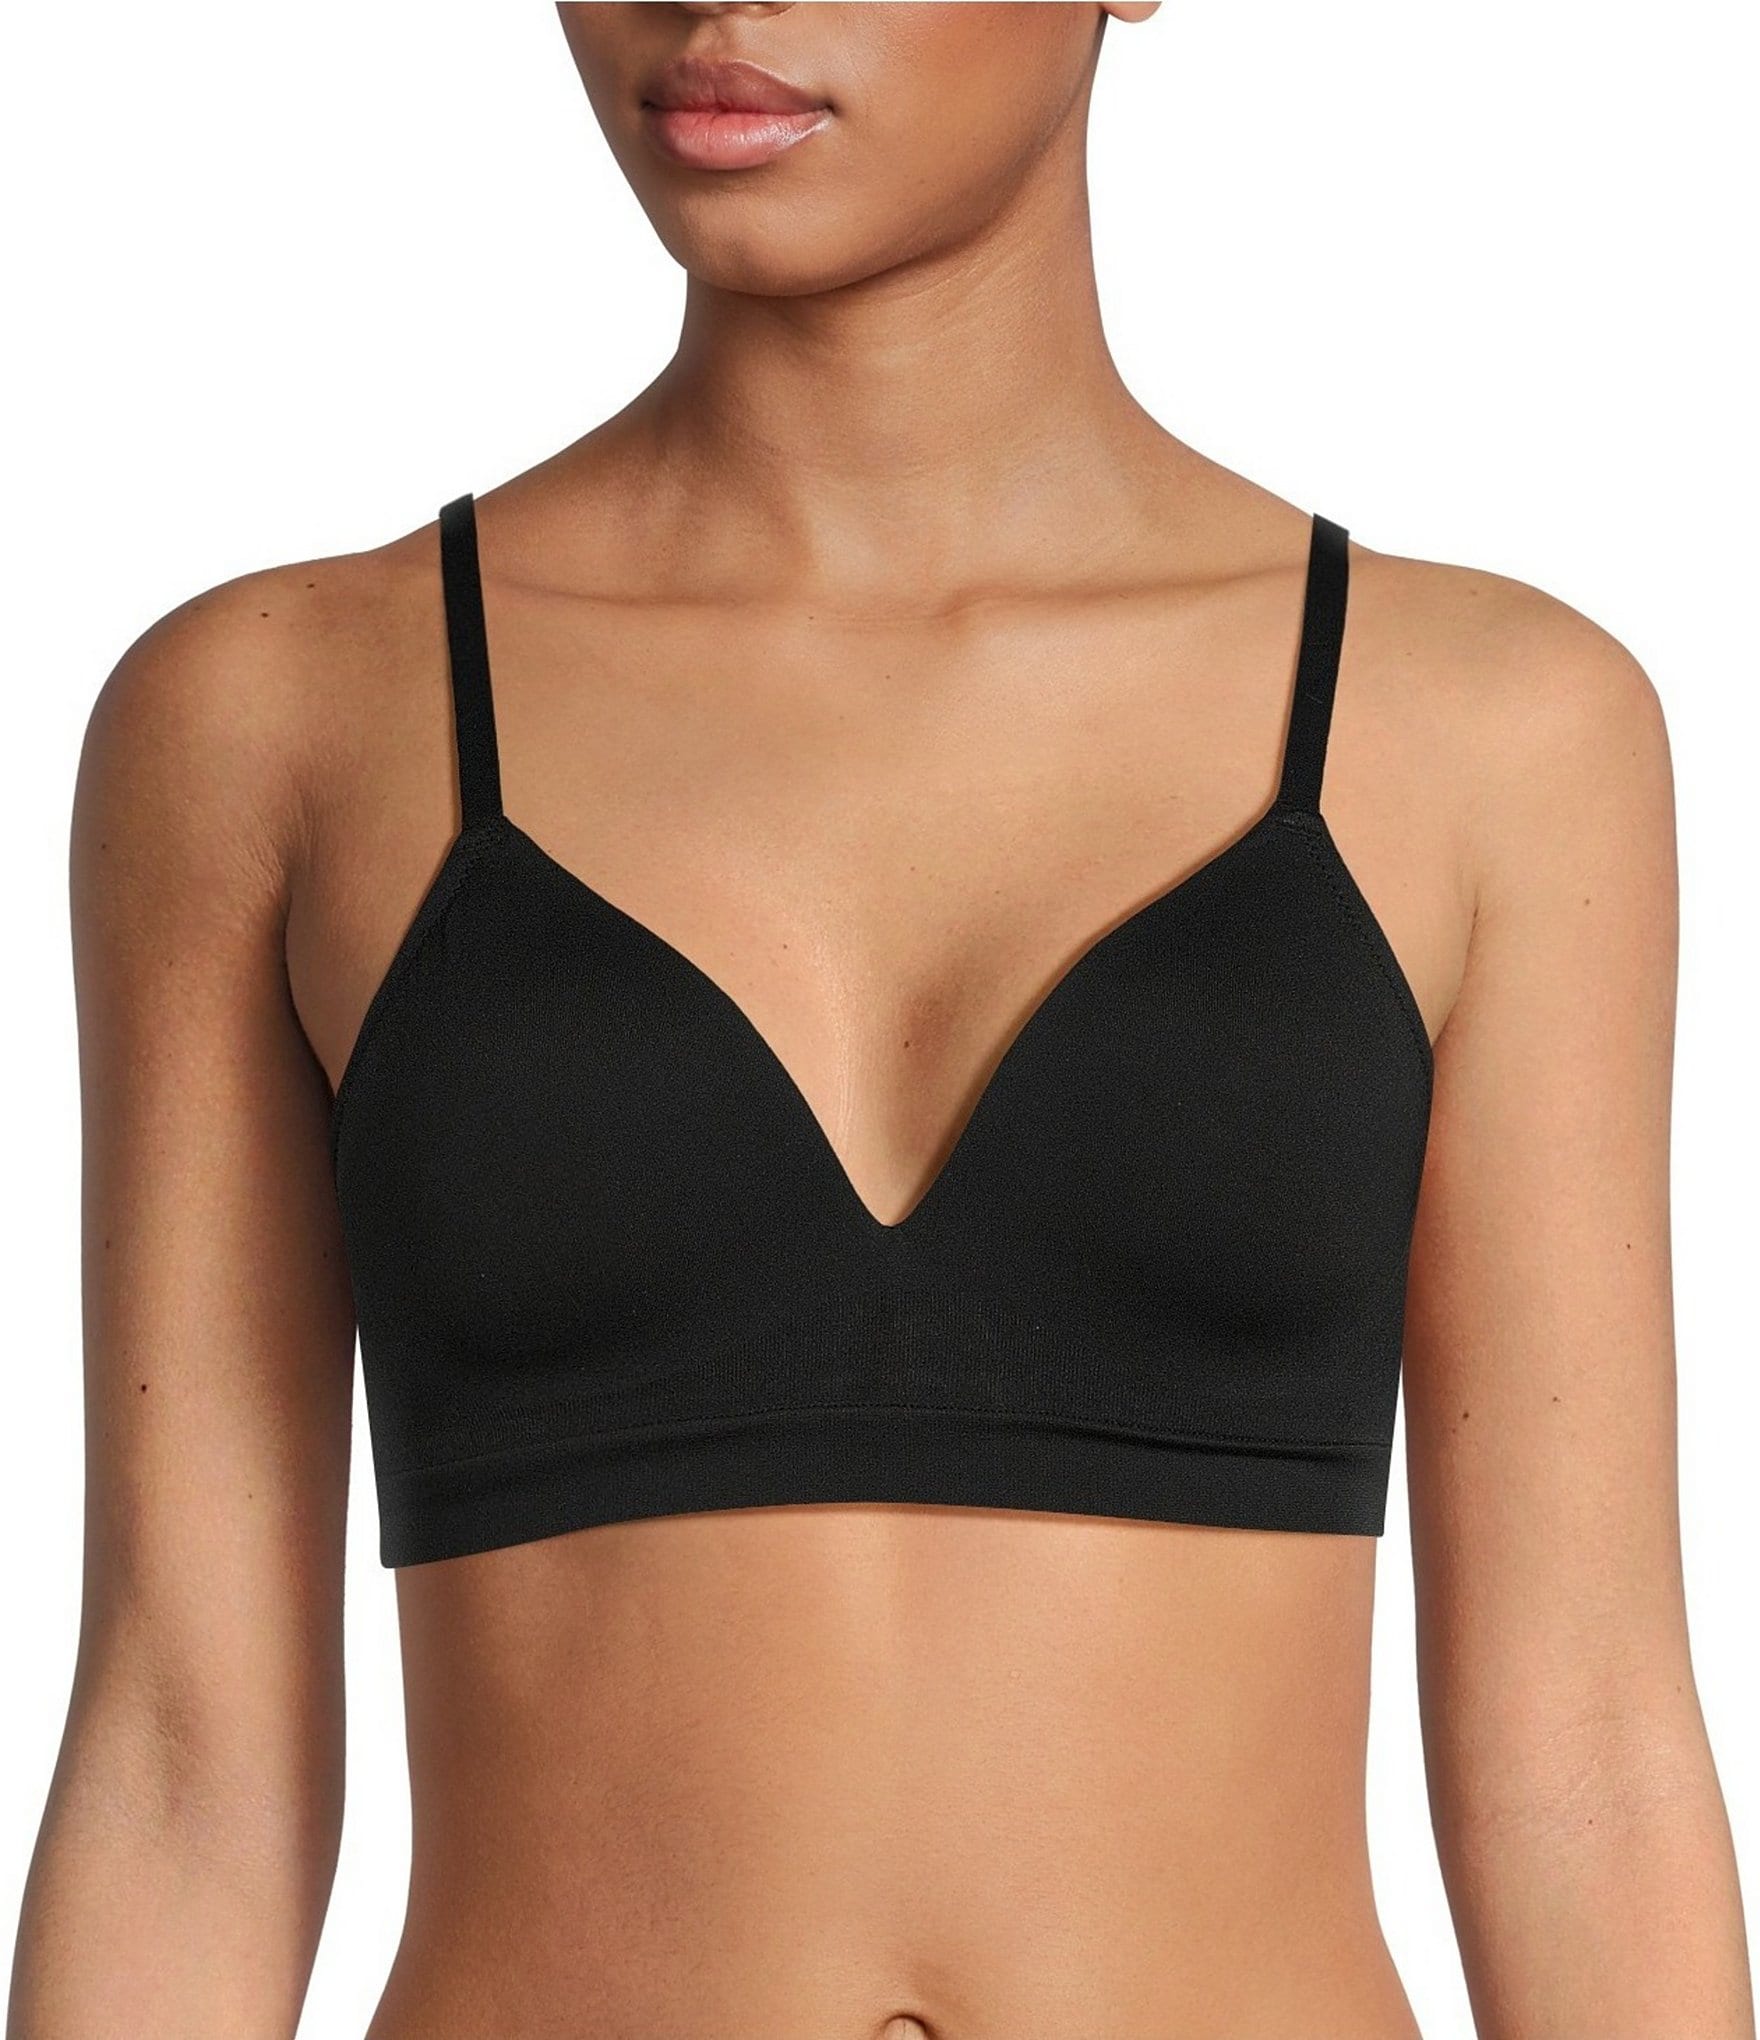 Modern Movement Women's Bra Wire-Free Cami Y82BM469 34 DDD Size undefined -  $11 - From Hannah